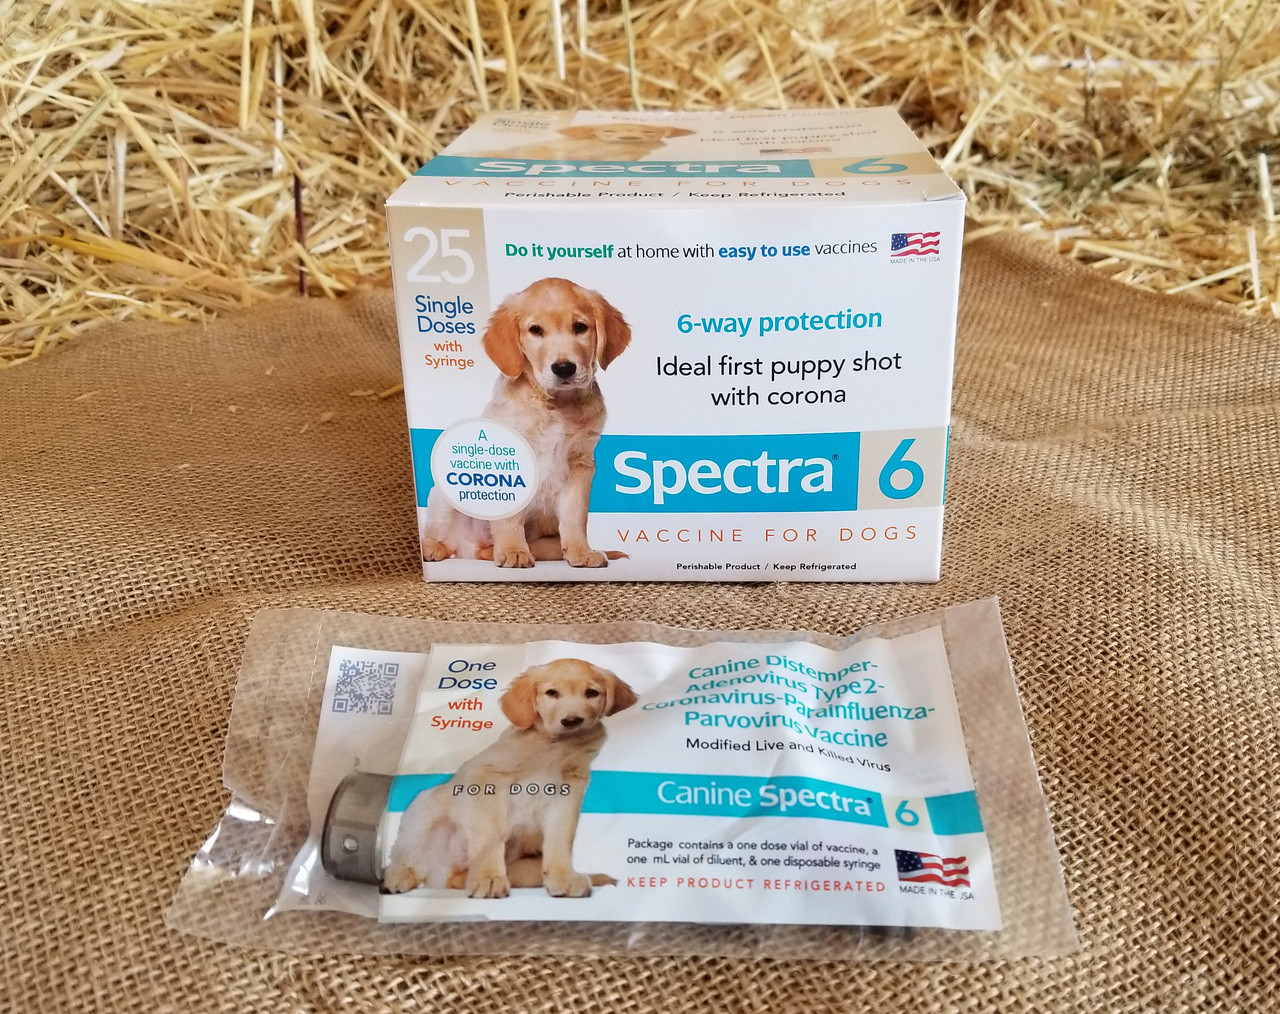 canine spectra 5 lot number